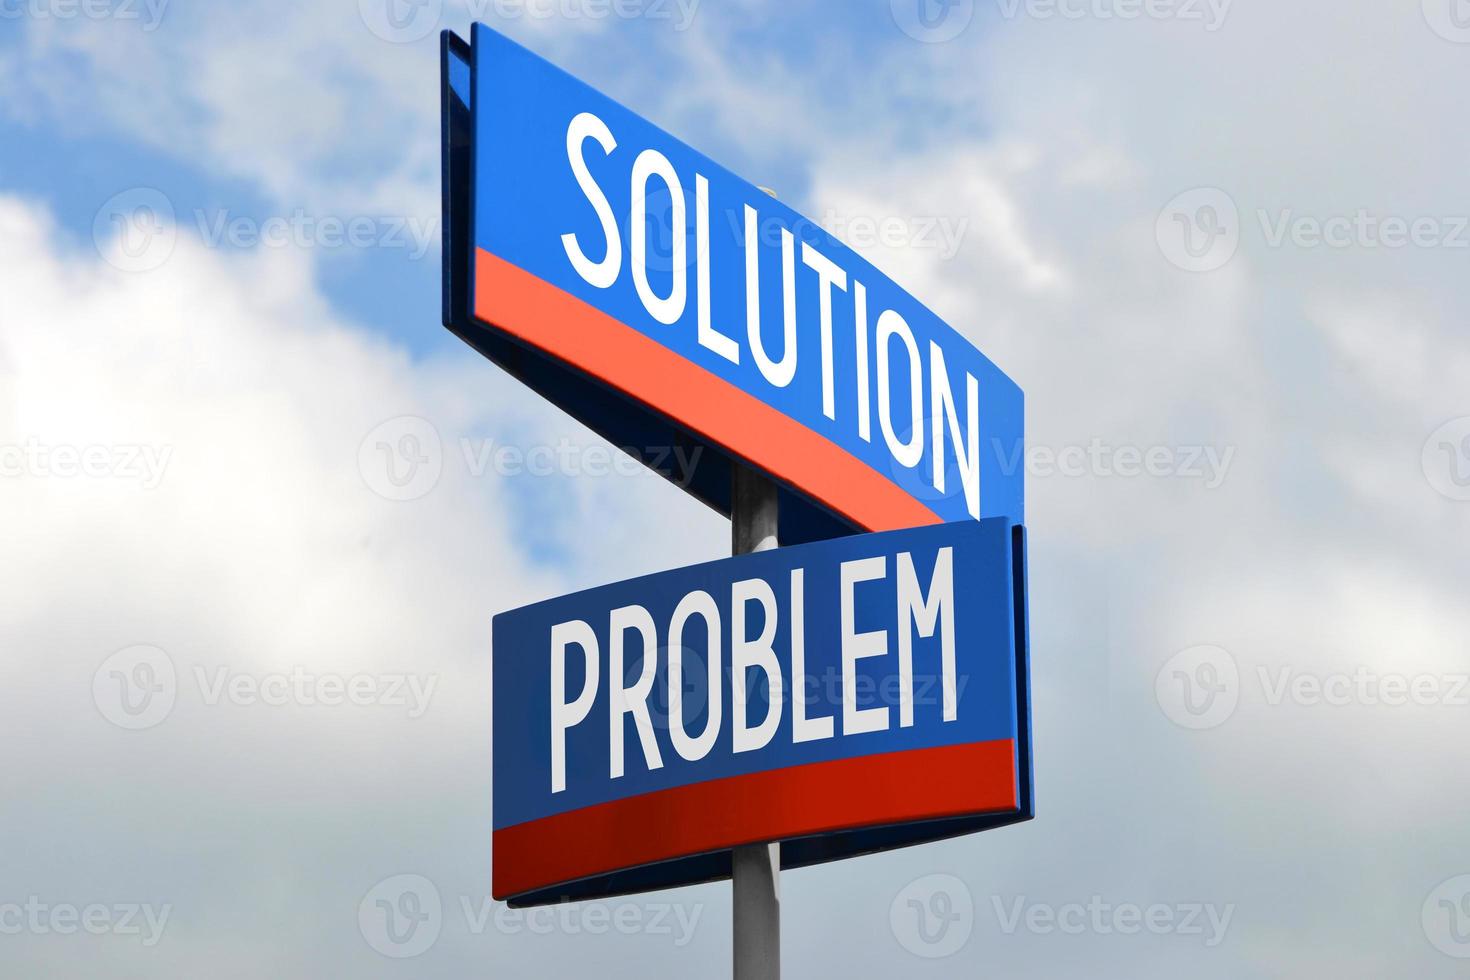 Problem and Solution Street Sign photo